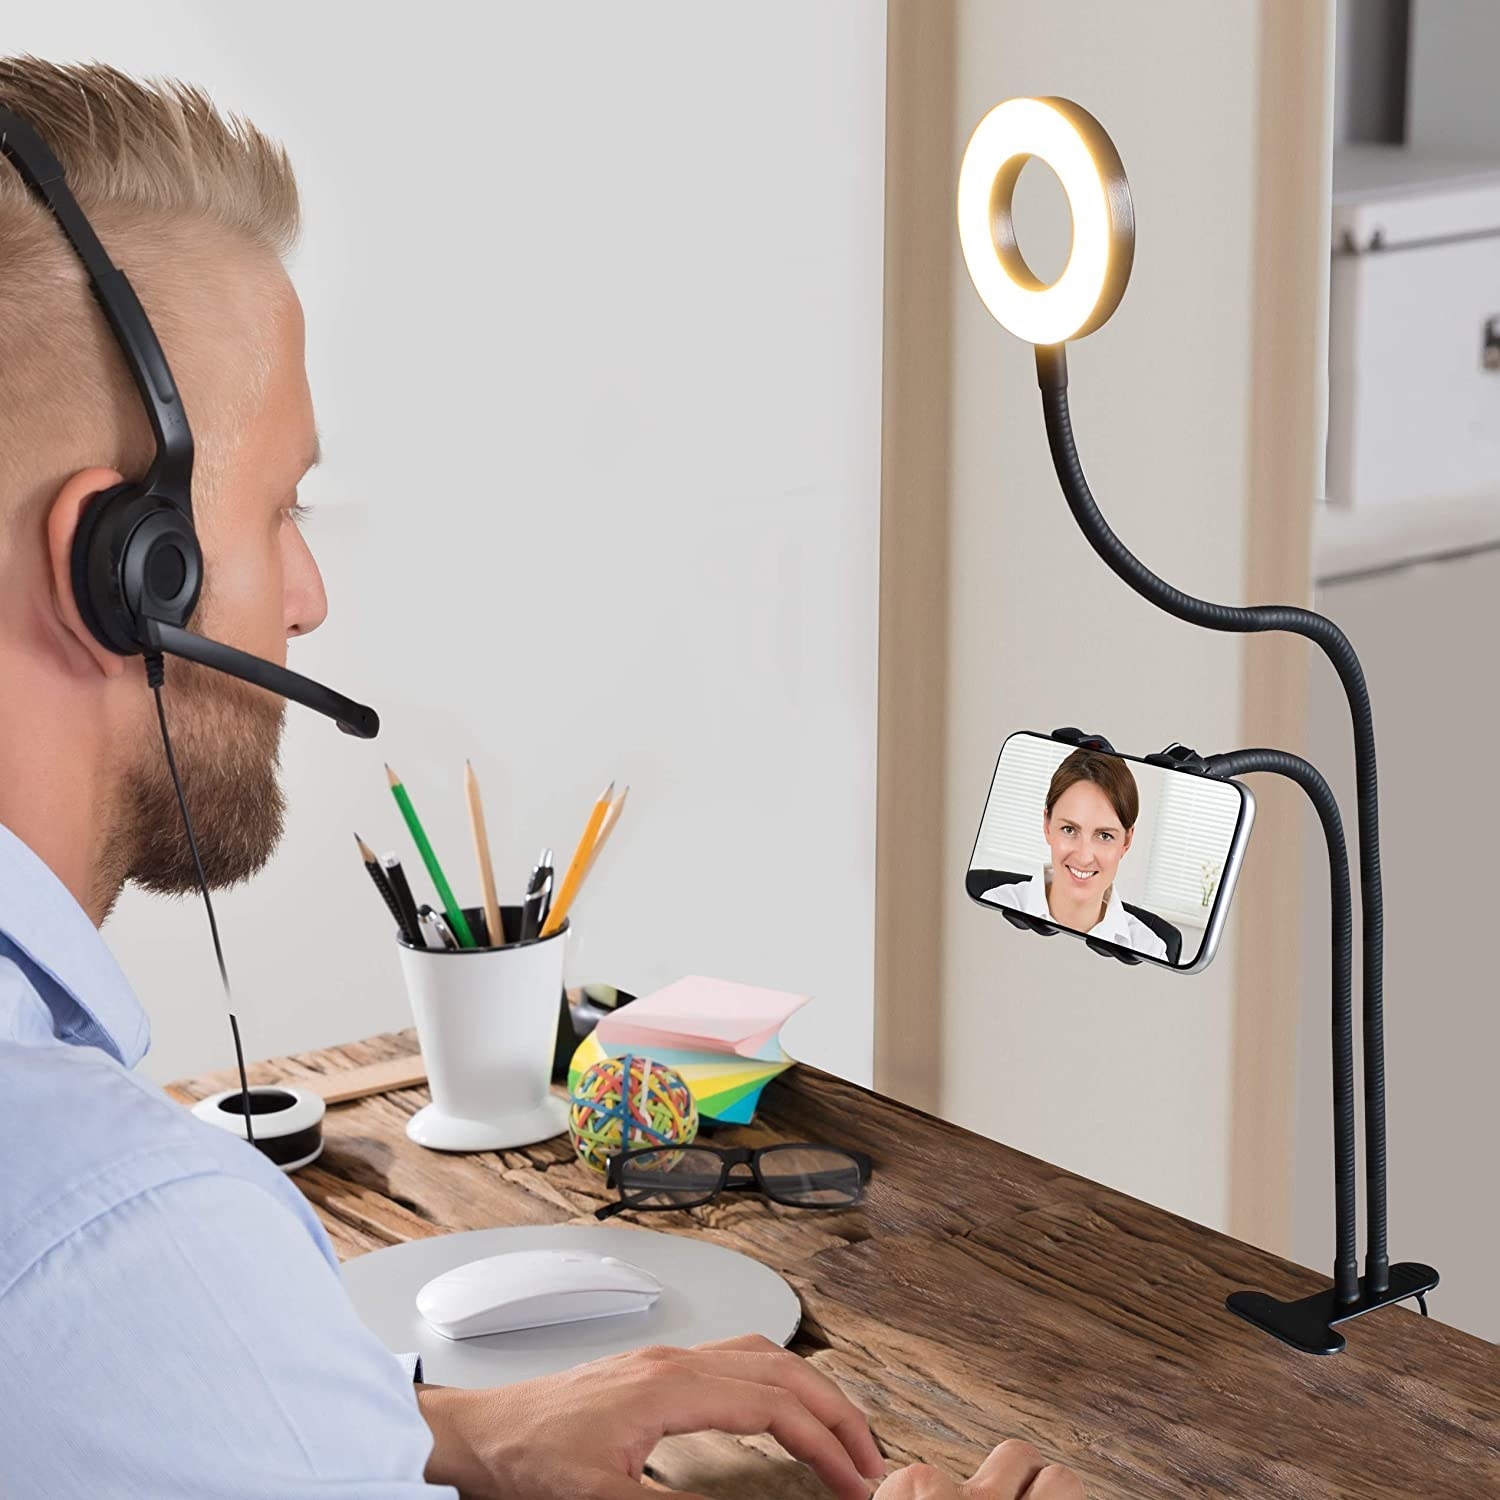 a person using the ring light phone stand while on a video call